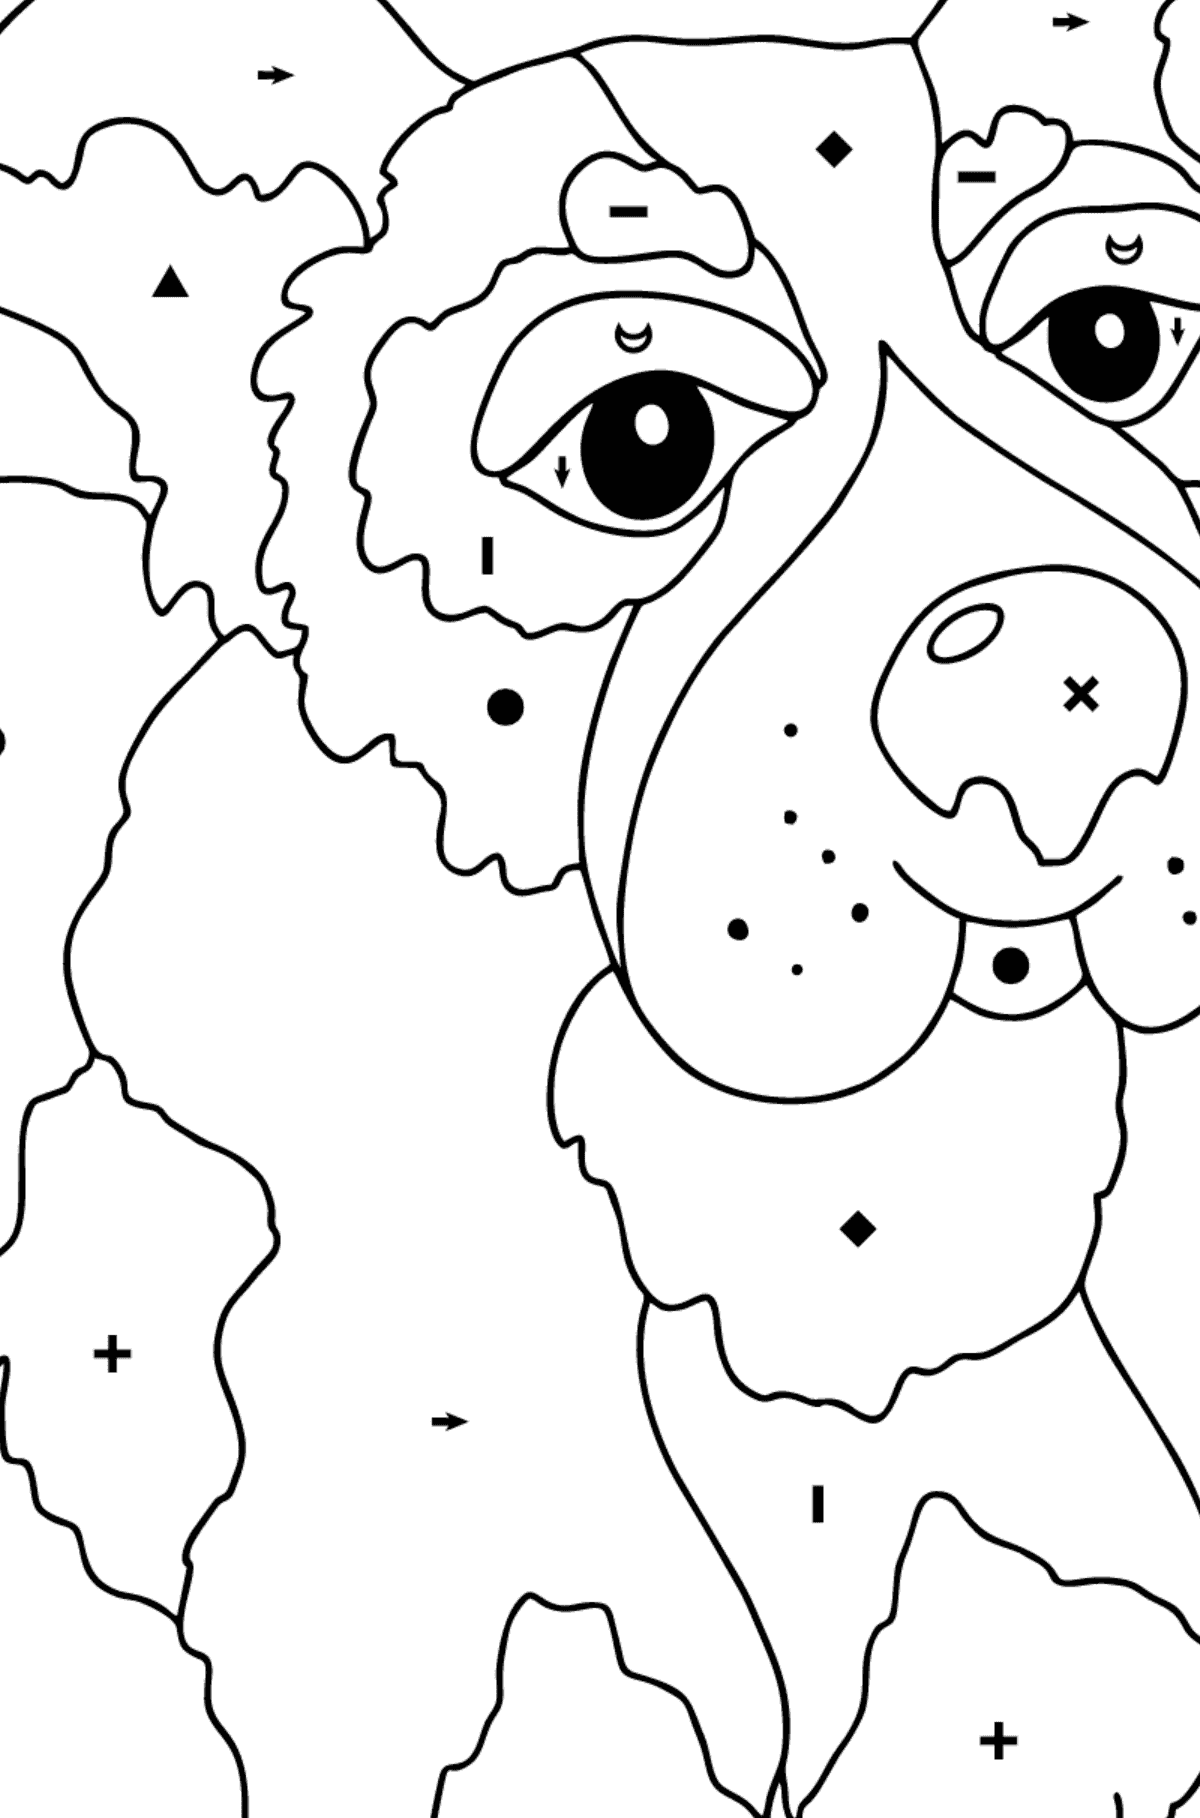 Coloring Page - A Dog is Playing with a Ball for Kids  - Color by Special Symbols